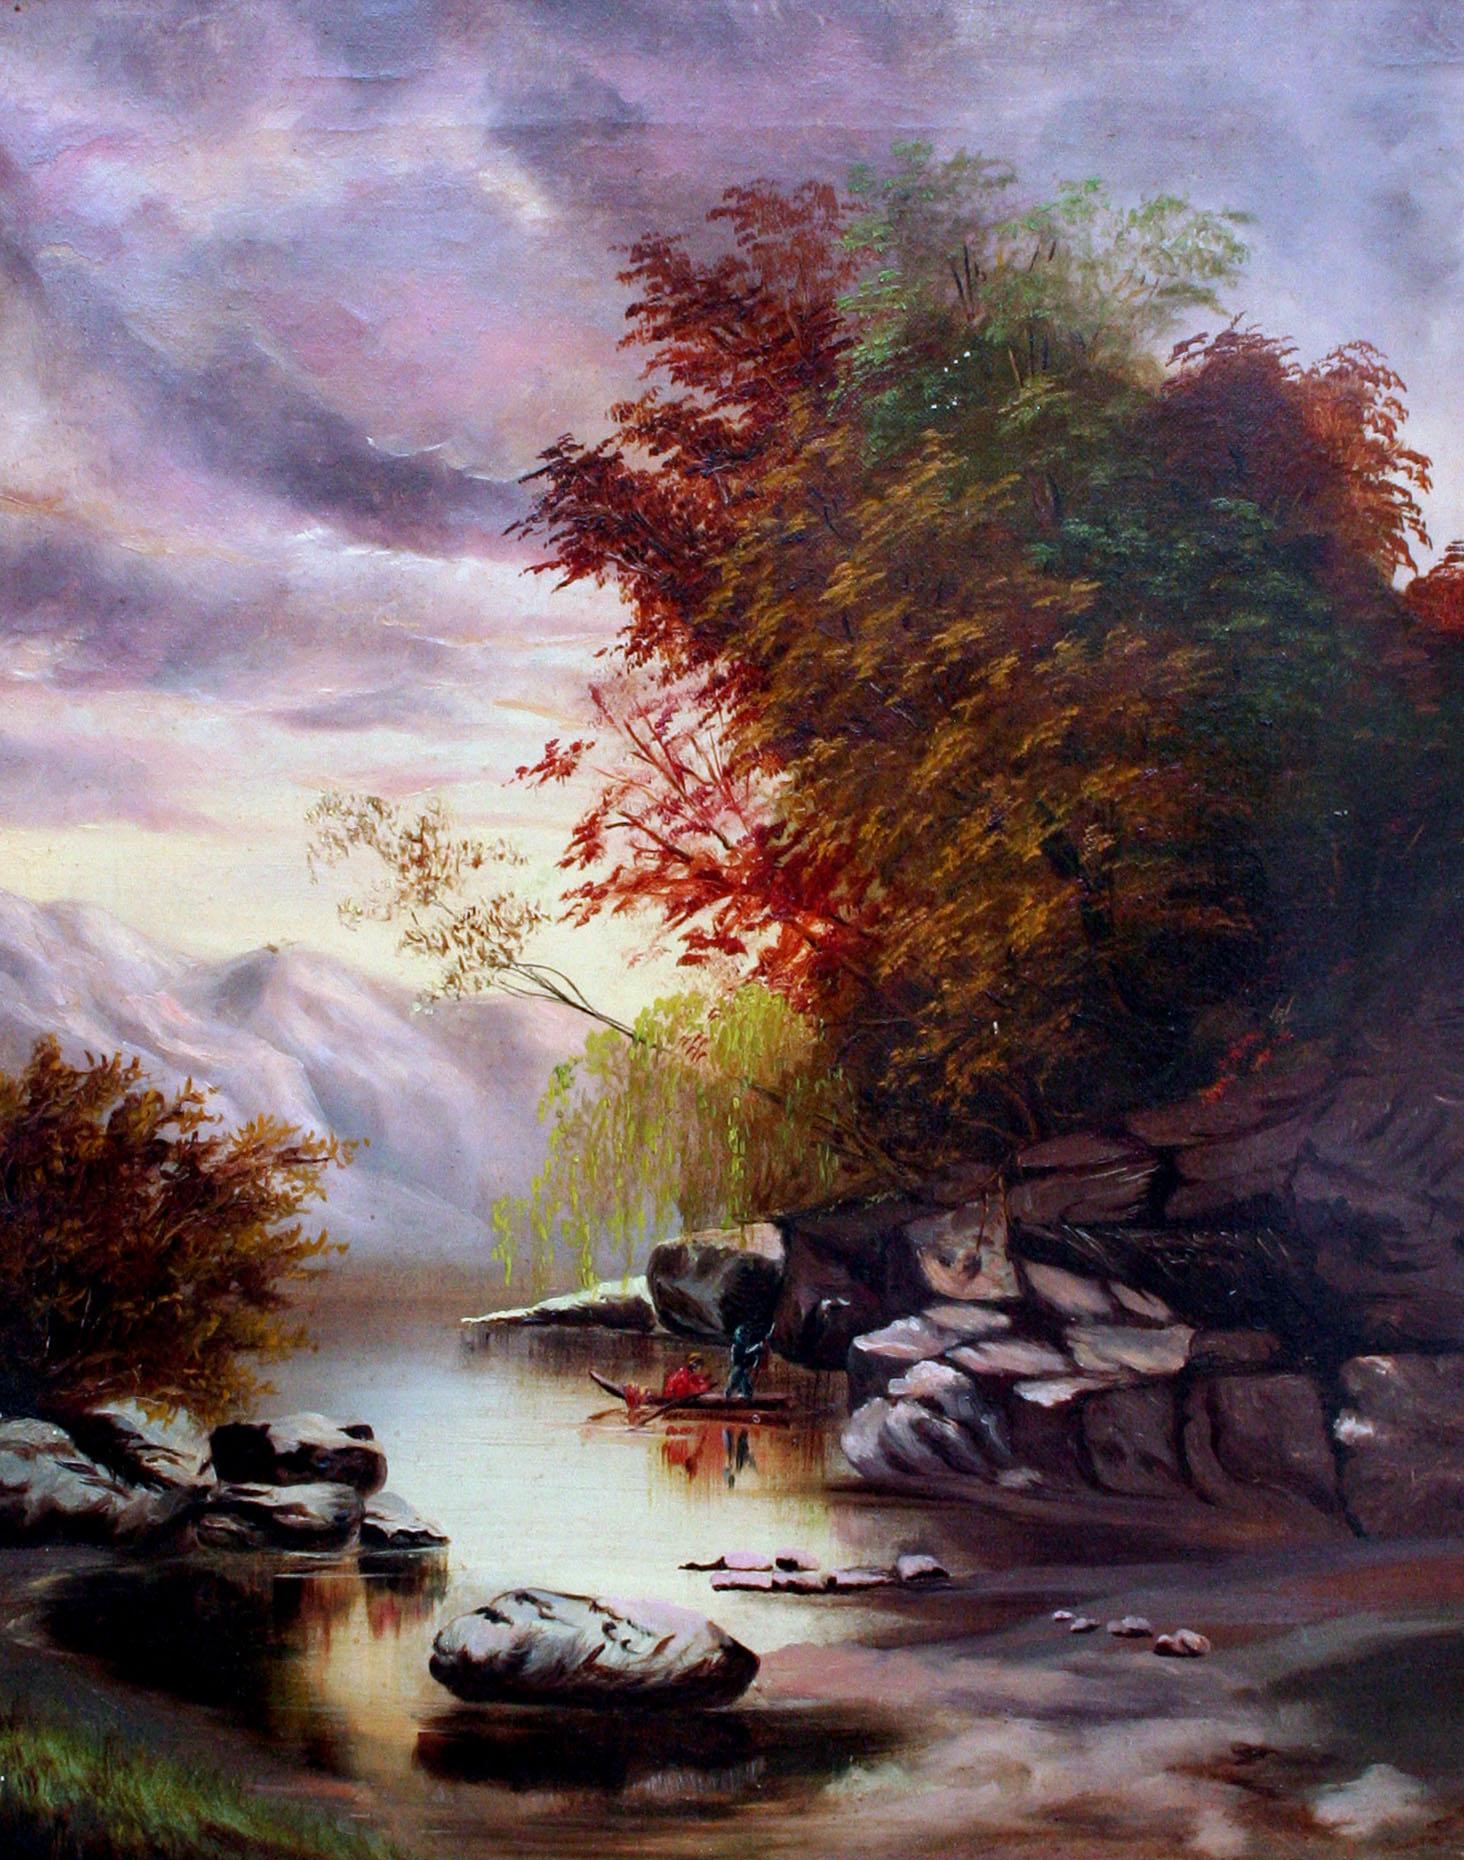 Early 20th Century Canoeing on the River Autumnal Landscape  - Painting by Unknown